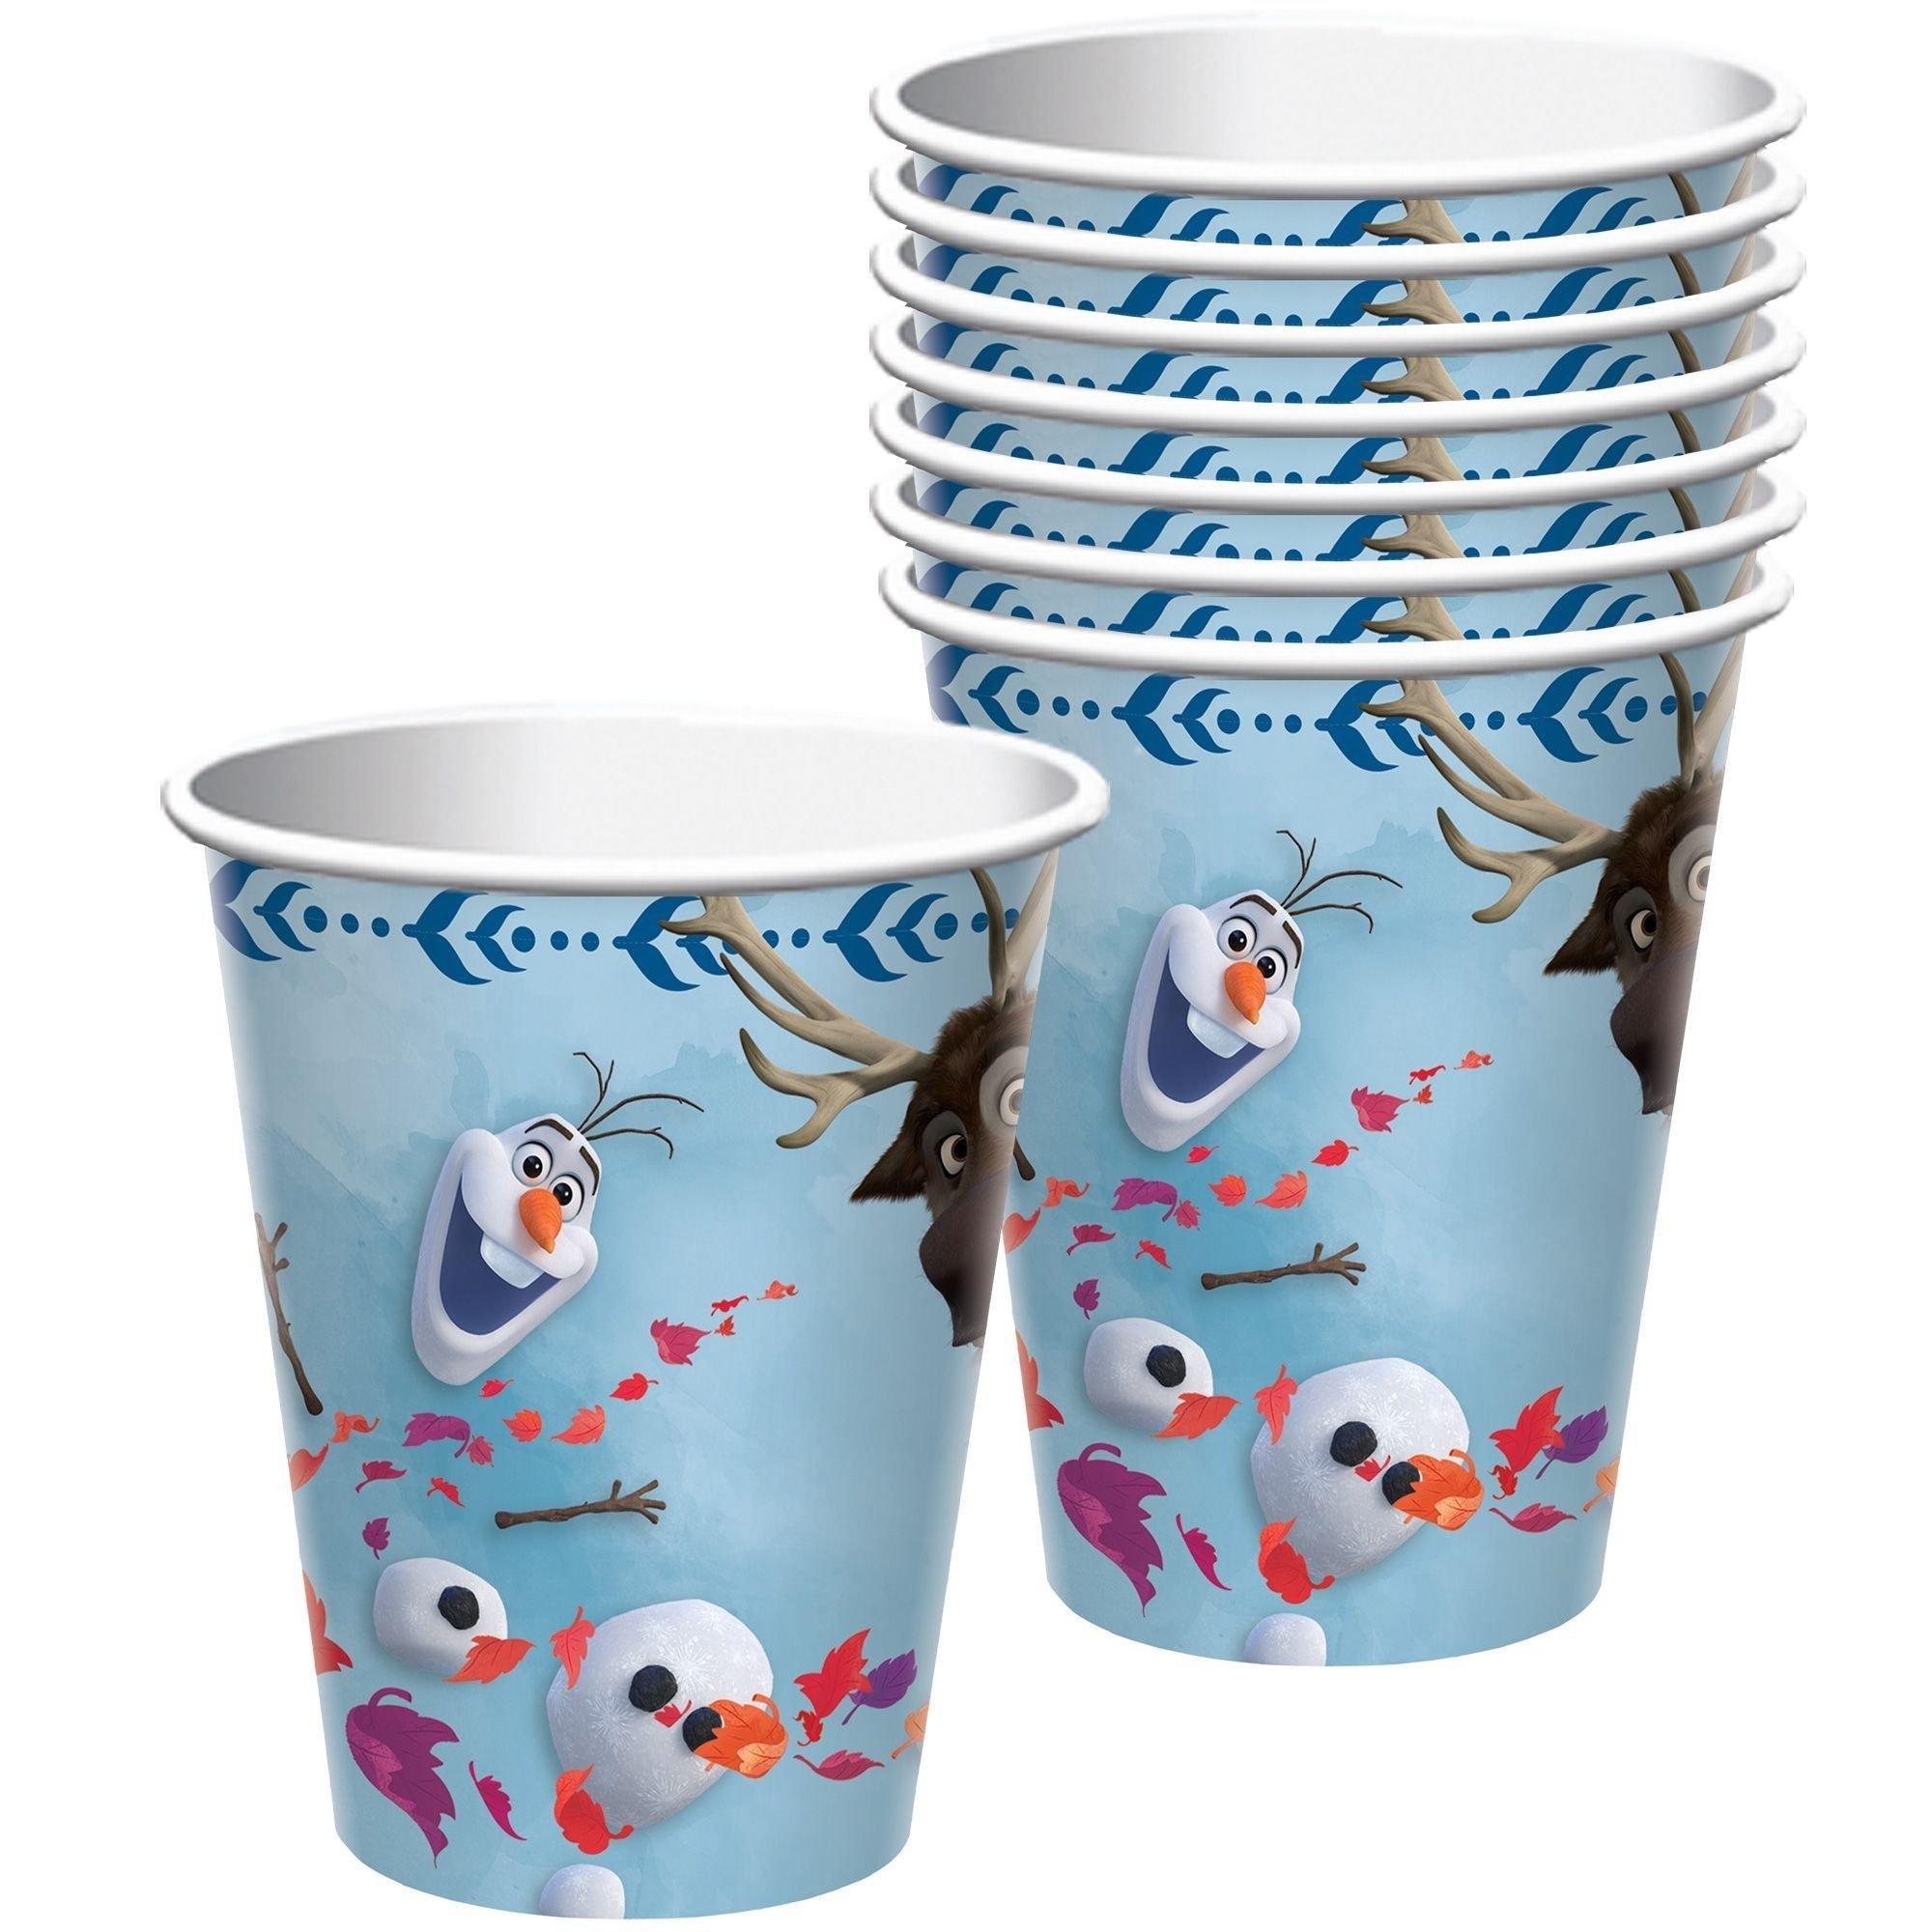 Frozen 2 Party Supplies Pack for 8 Guests - Kit Includes Plates, Napkins, Cups, Table Cover, Banner Decoration & Favor Cup